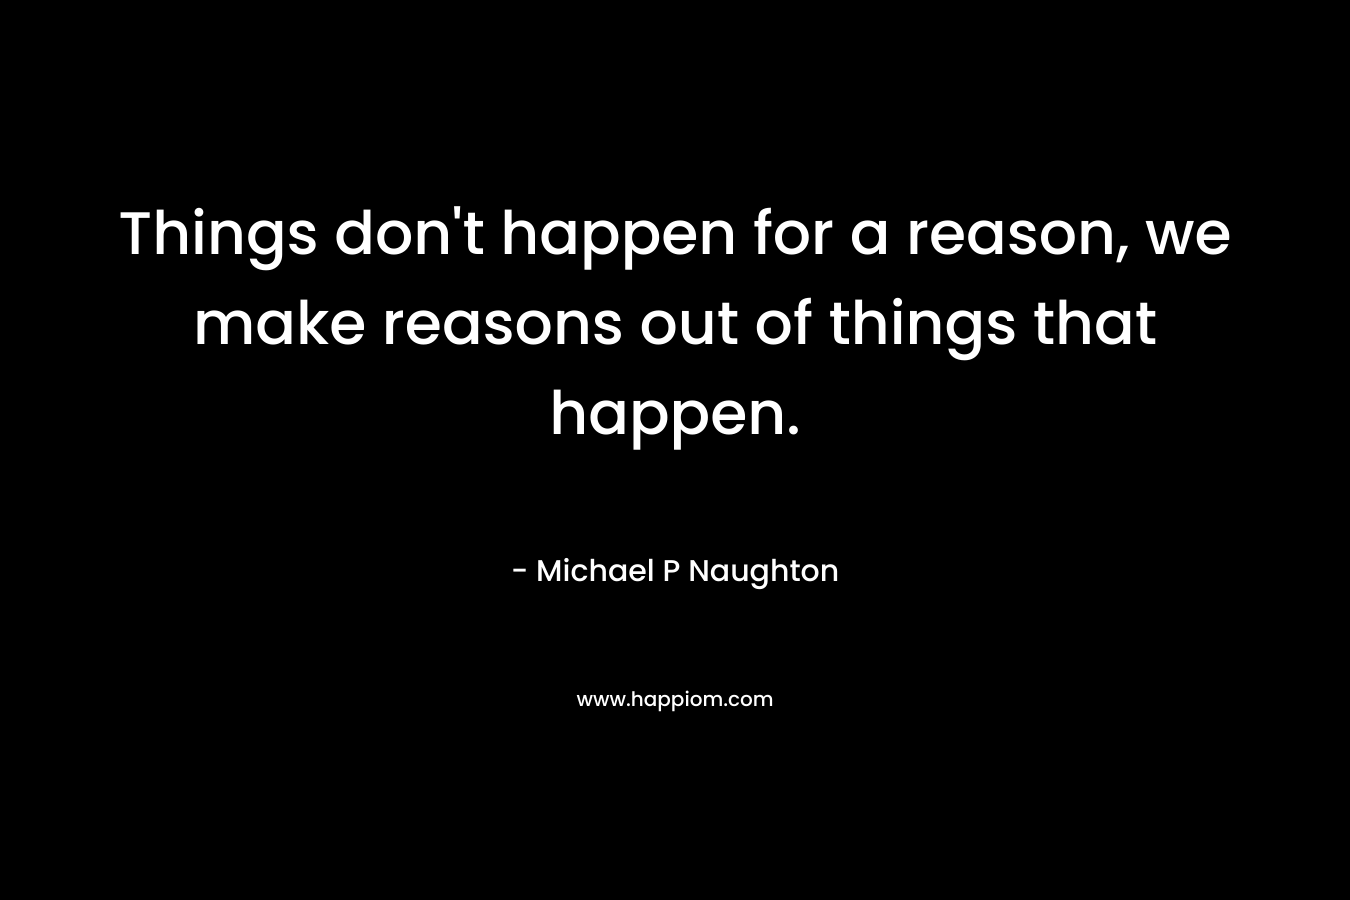 Things don't happen for a reason, we make reasons out of things that happen.